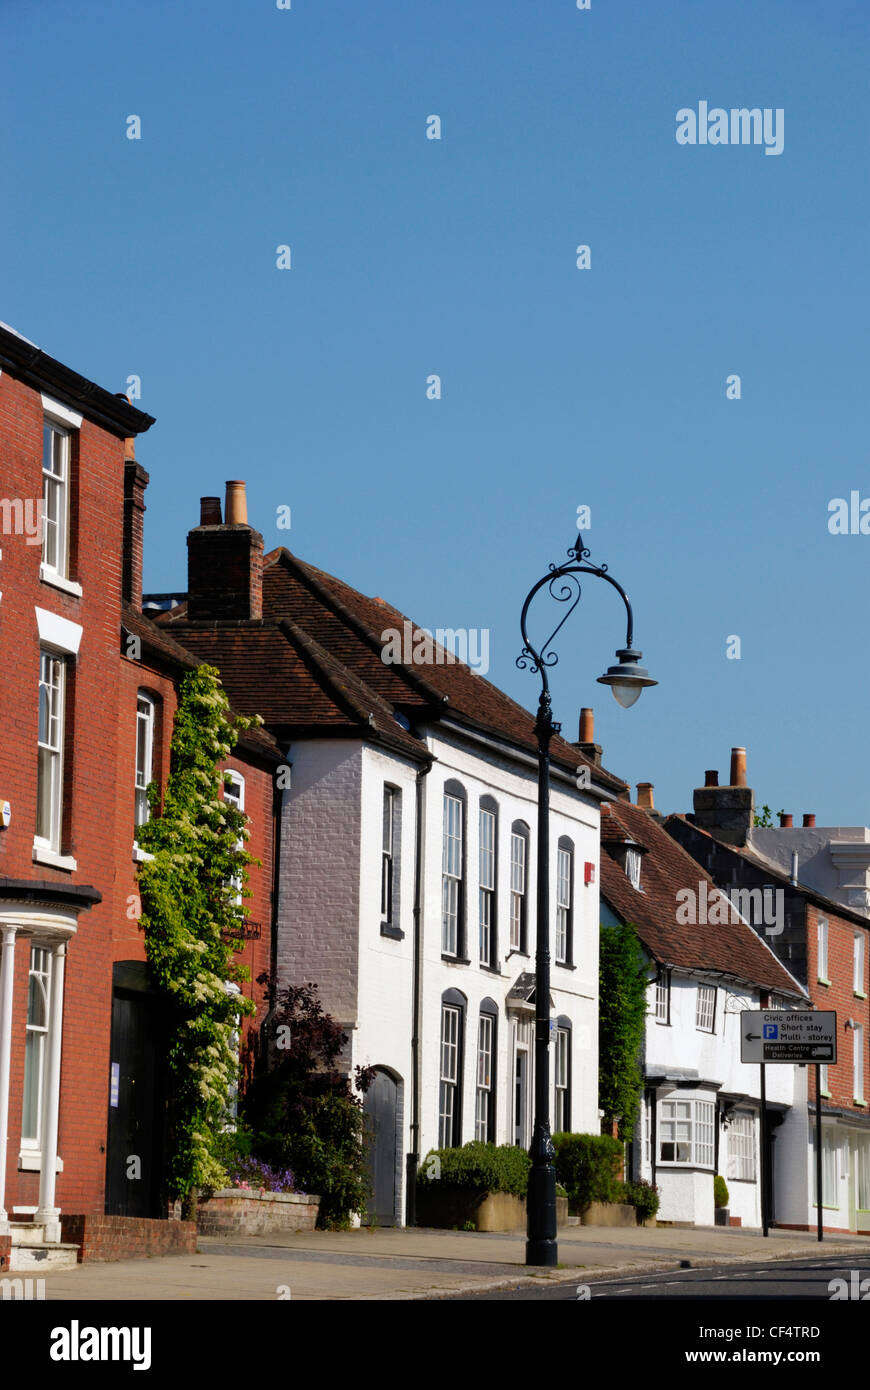 The High Street in the market town of Fareham. Stock Photo